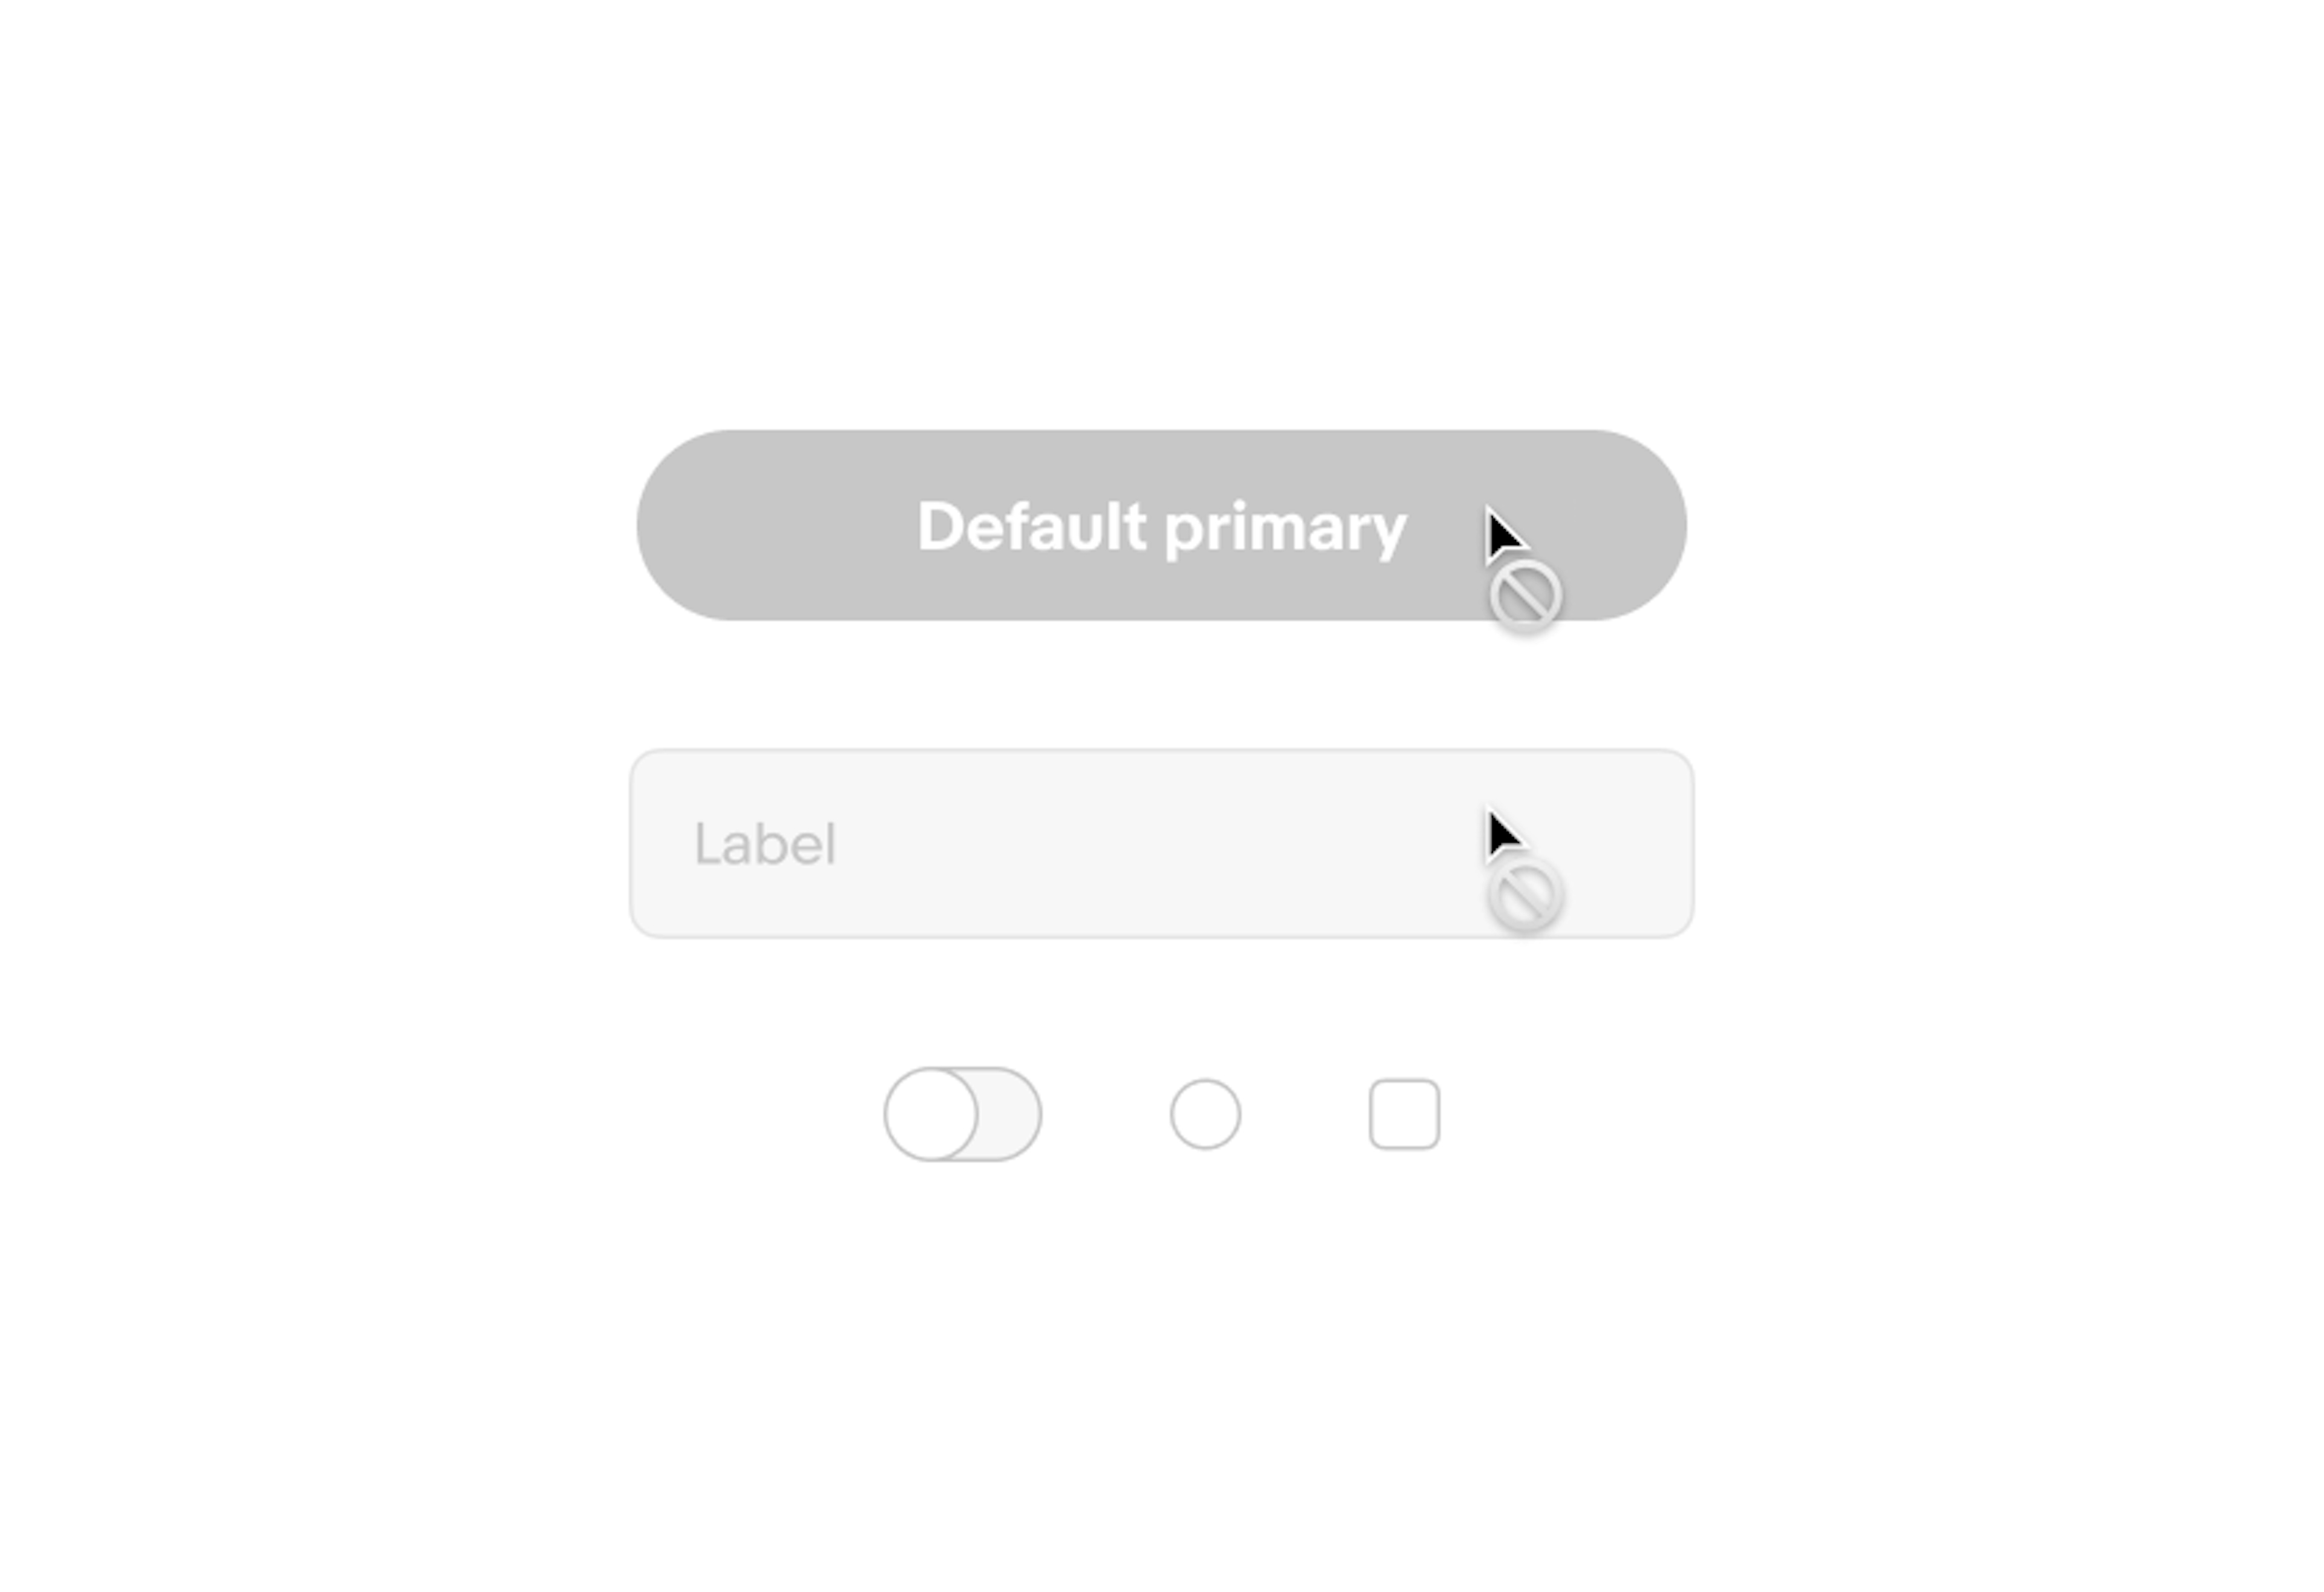 Disabled elements in light mode. From top to bottom is cta button, text field, toggle, radio button, and checkbox. All are grayed out. On hover an icon appears next to the cursor containing a circle with a diagonal line.